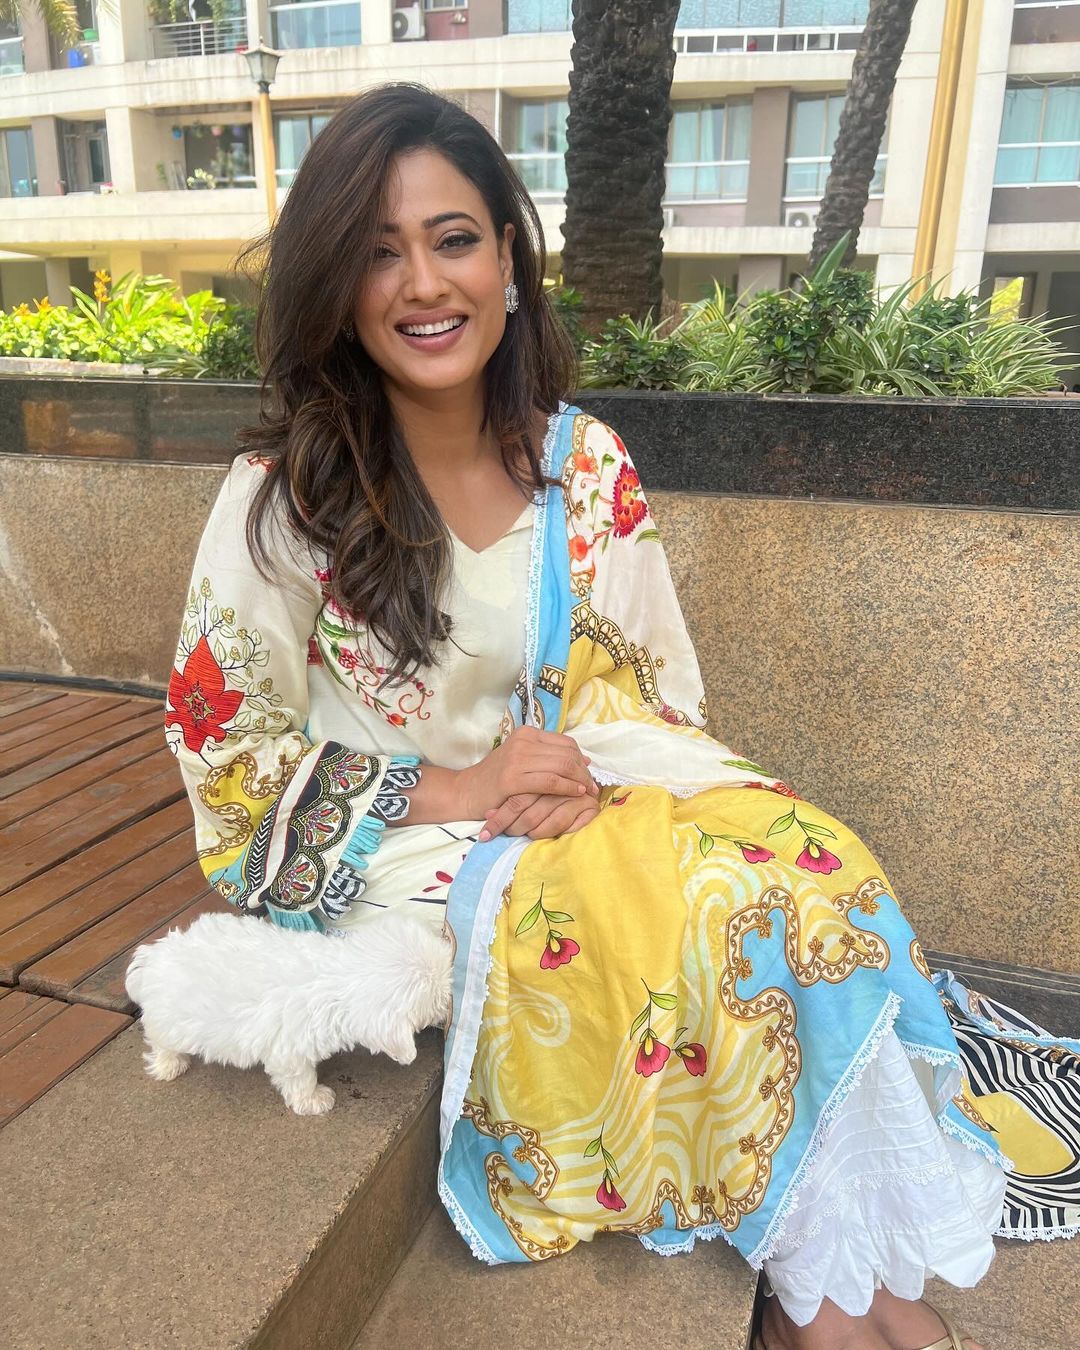 Our Most Charming Actress Shweta Tiwari Shares Heart-Warming Pictures. They Left Her Fans In Awe, Read On To Know What It Is! 